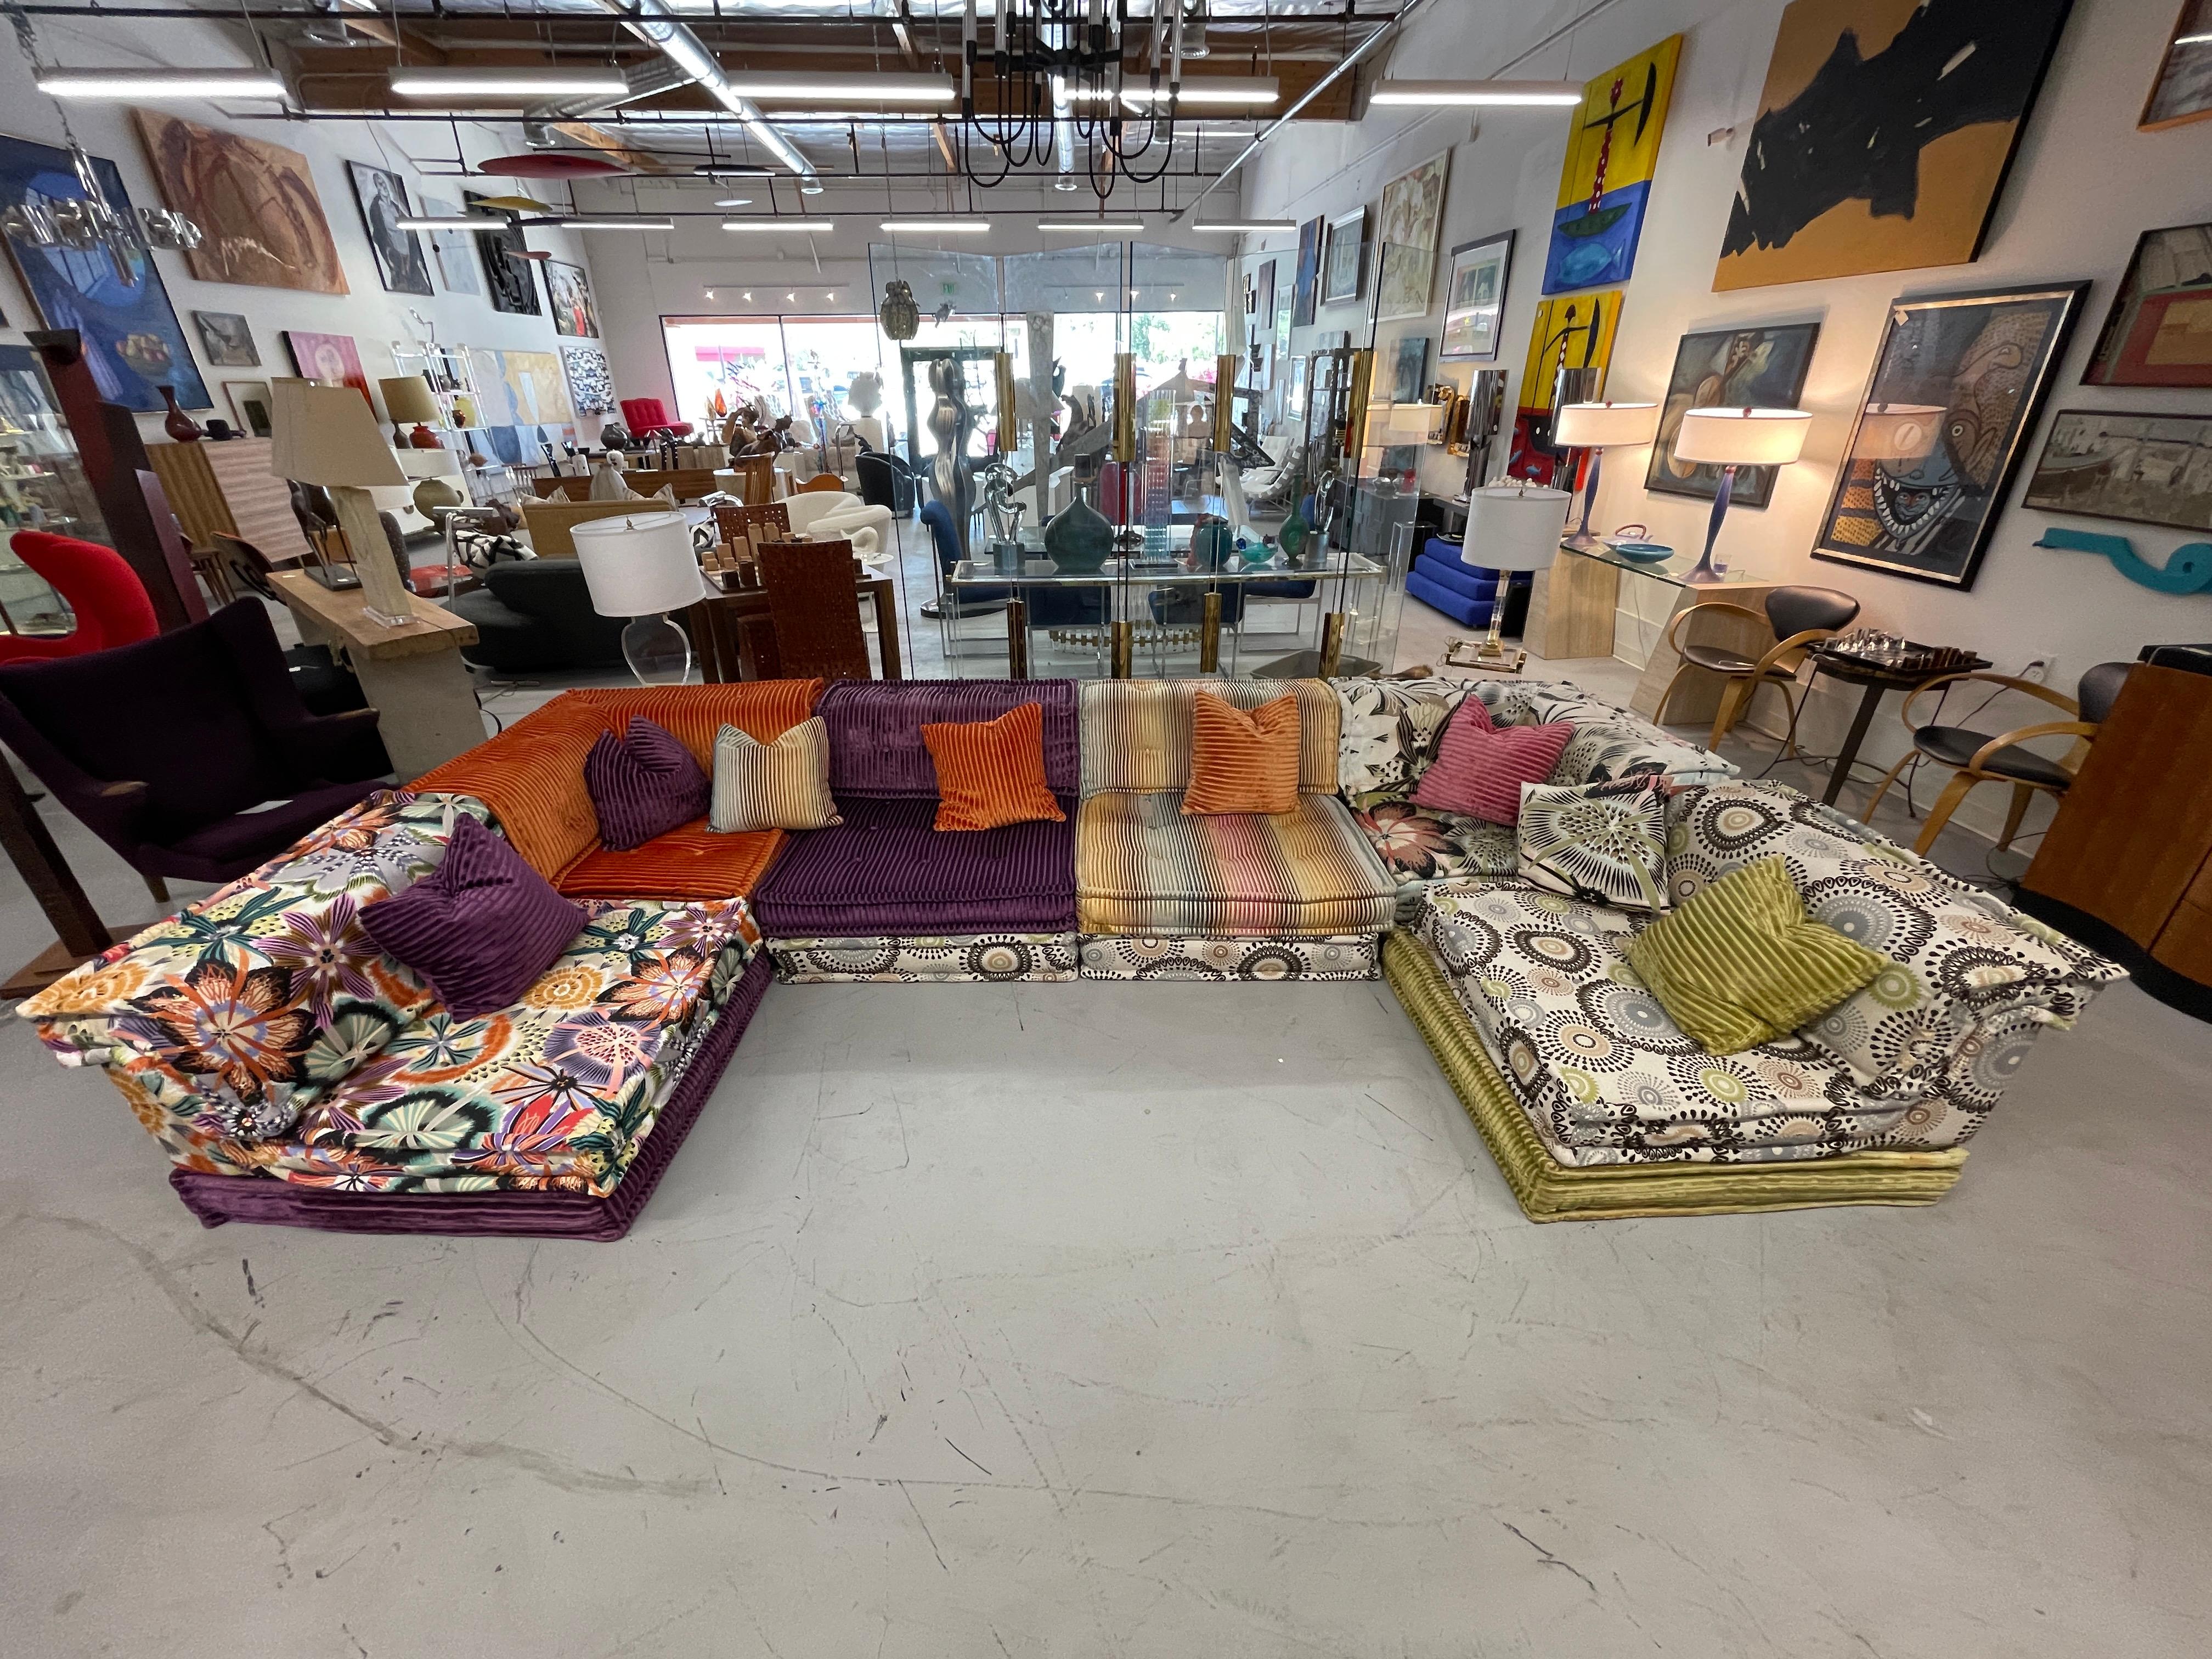 Wonderful large vintage Roche Bobois Mah Jong sofa designed by Hans Hopfer in the 1970’s. This set features Missoni fabric. Some of the pieces have just been redone with new Missoni home fabric. There are 6 cushions with backs including 2 corner